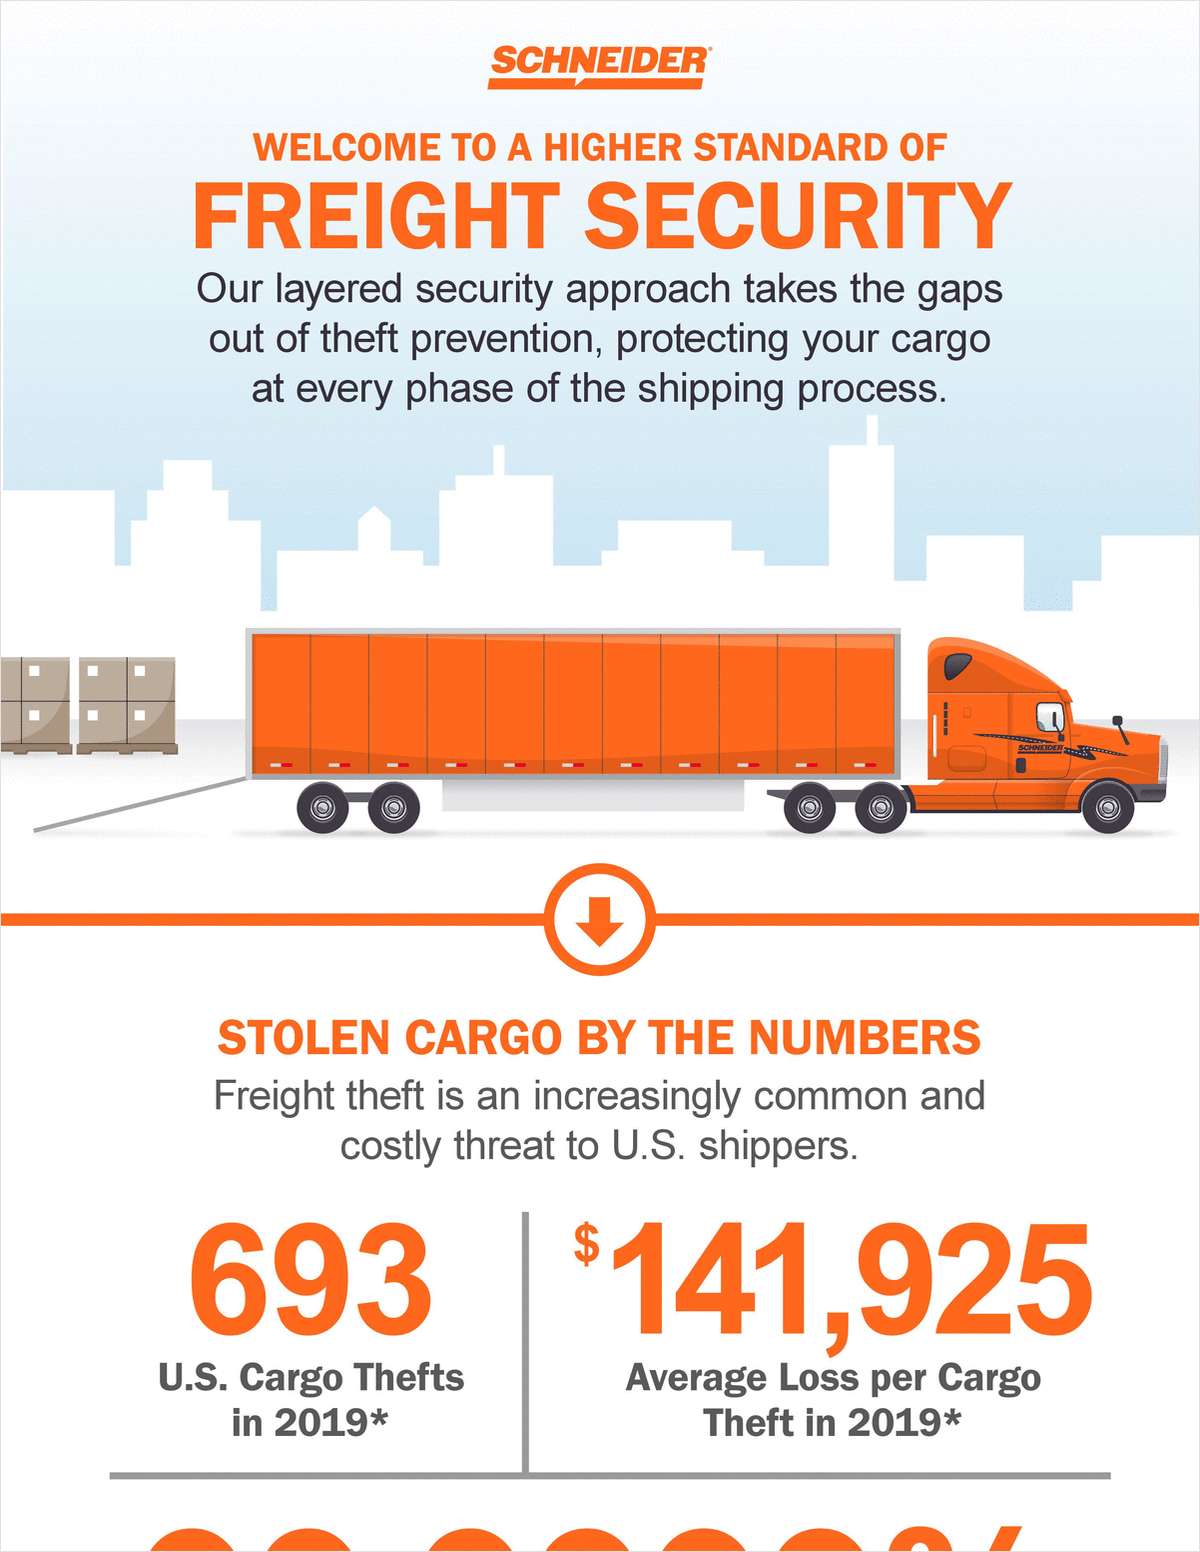 Tomorrow's Freight Security Here Today